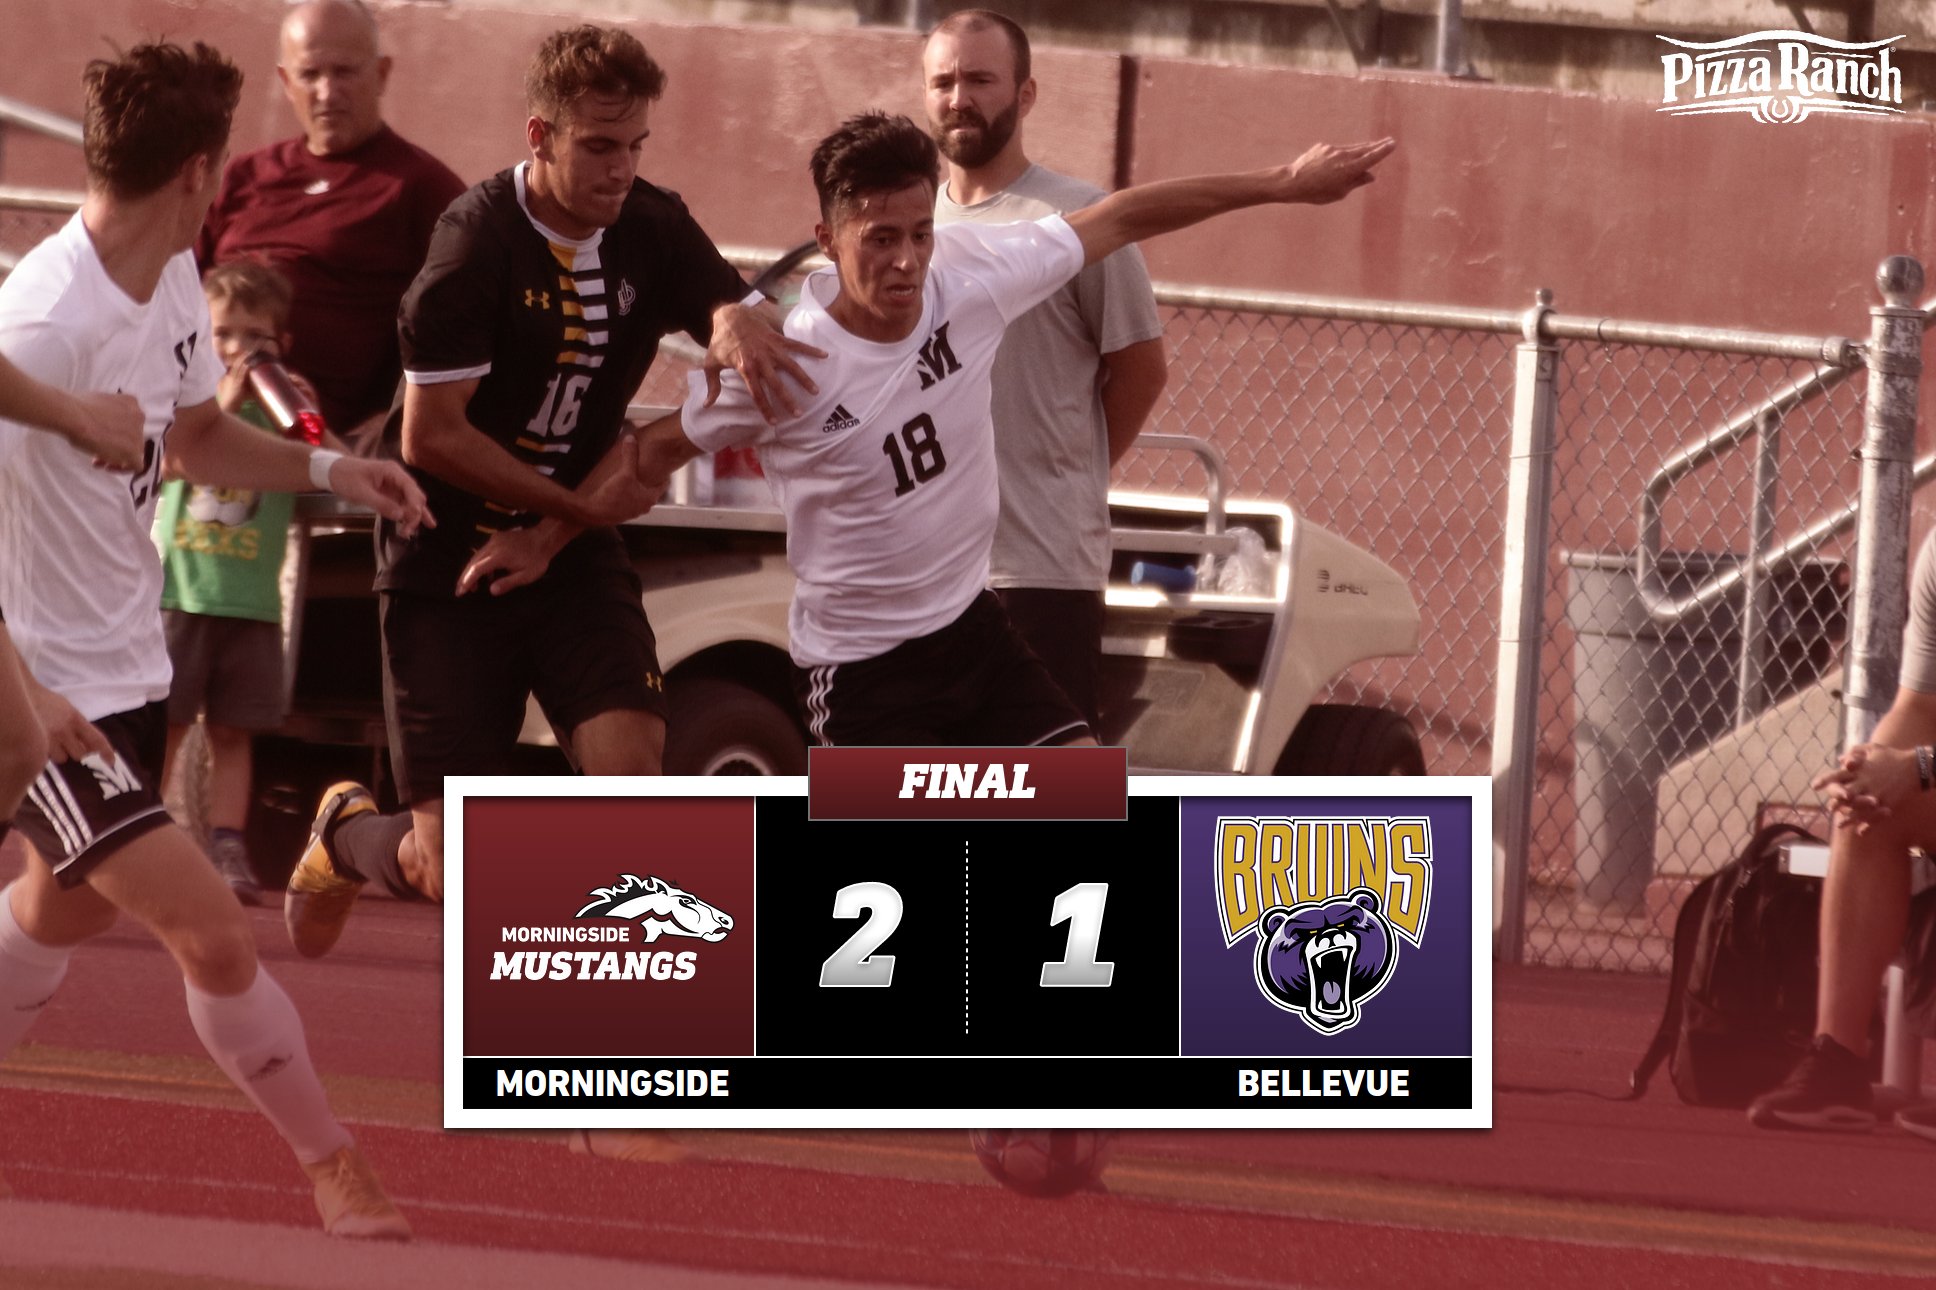 Men's soccer collects first win of the season 2-1 over no.12 ranked Bellevue